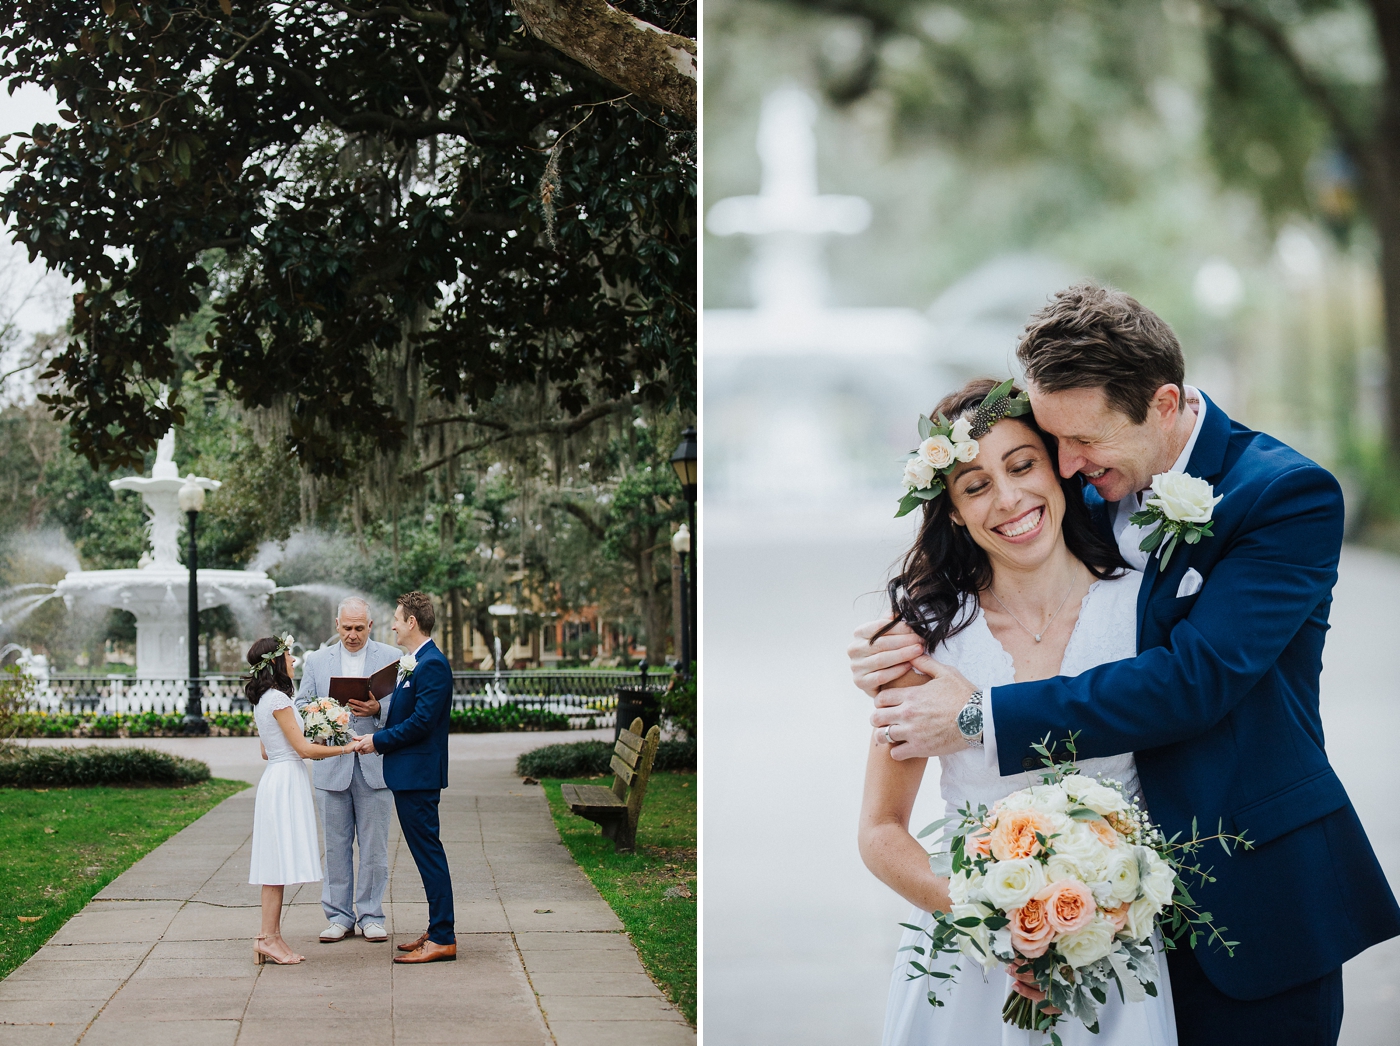 The Top 10 Spots to Elope in Savannah